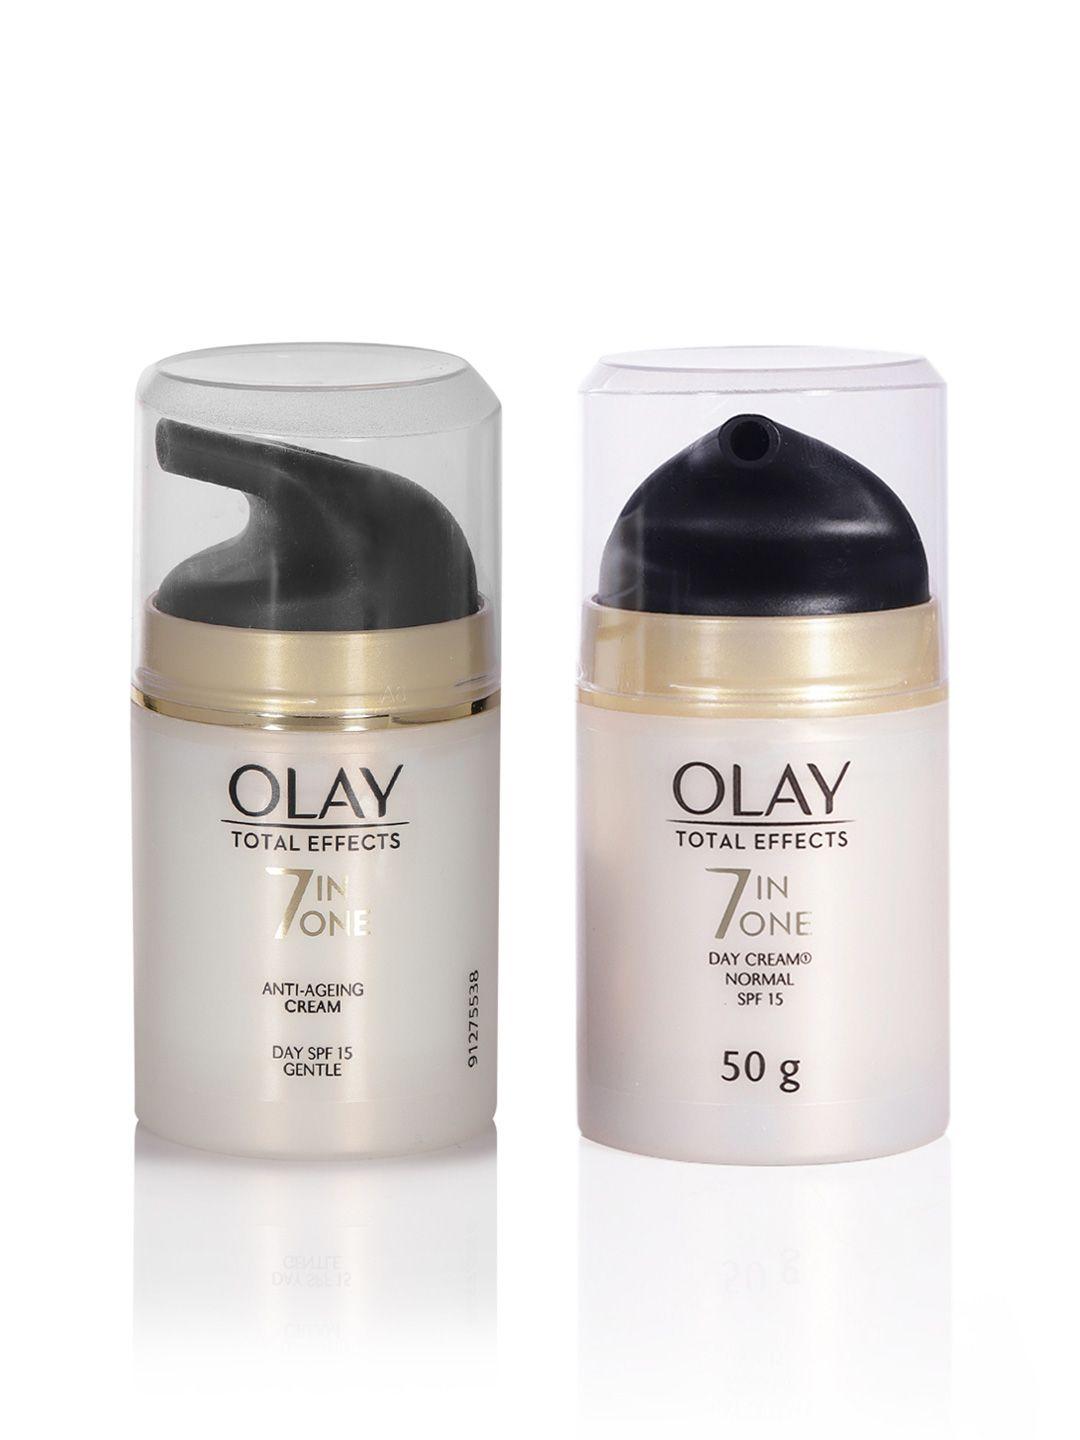 olay set of total effects 7 in one day cream normal spf 15 & anti aging skin cream spf 15